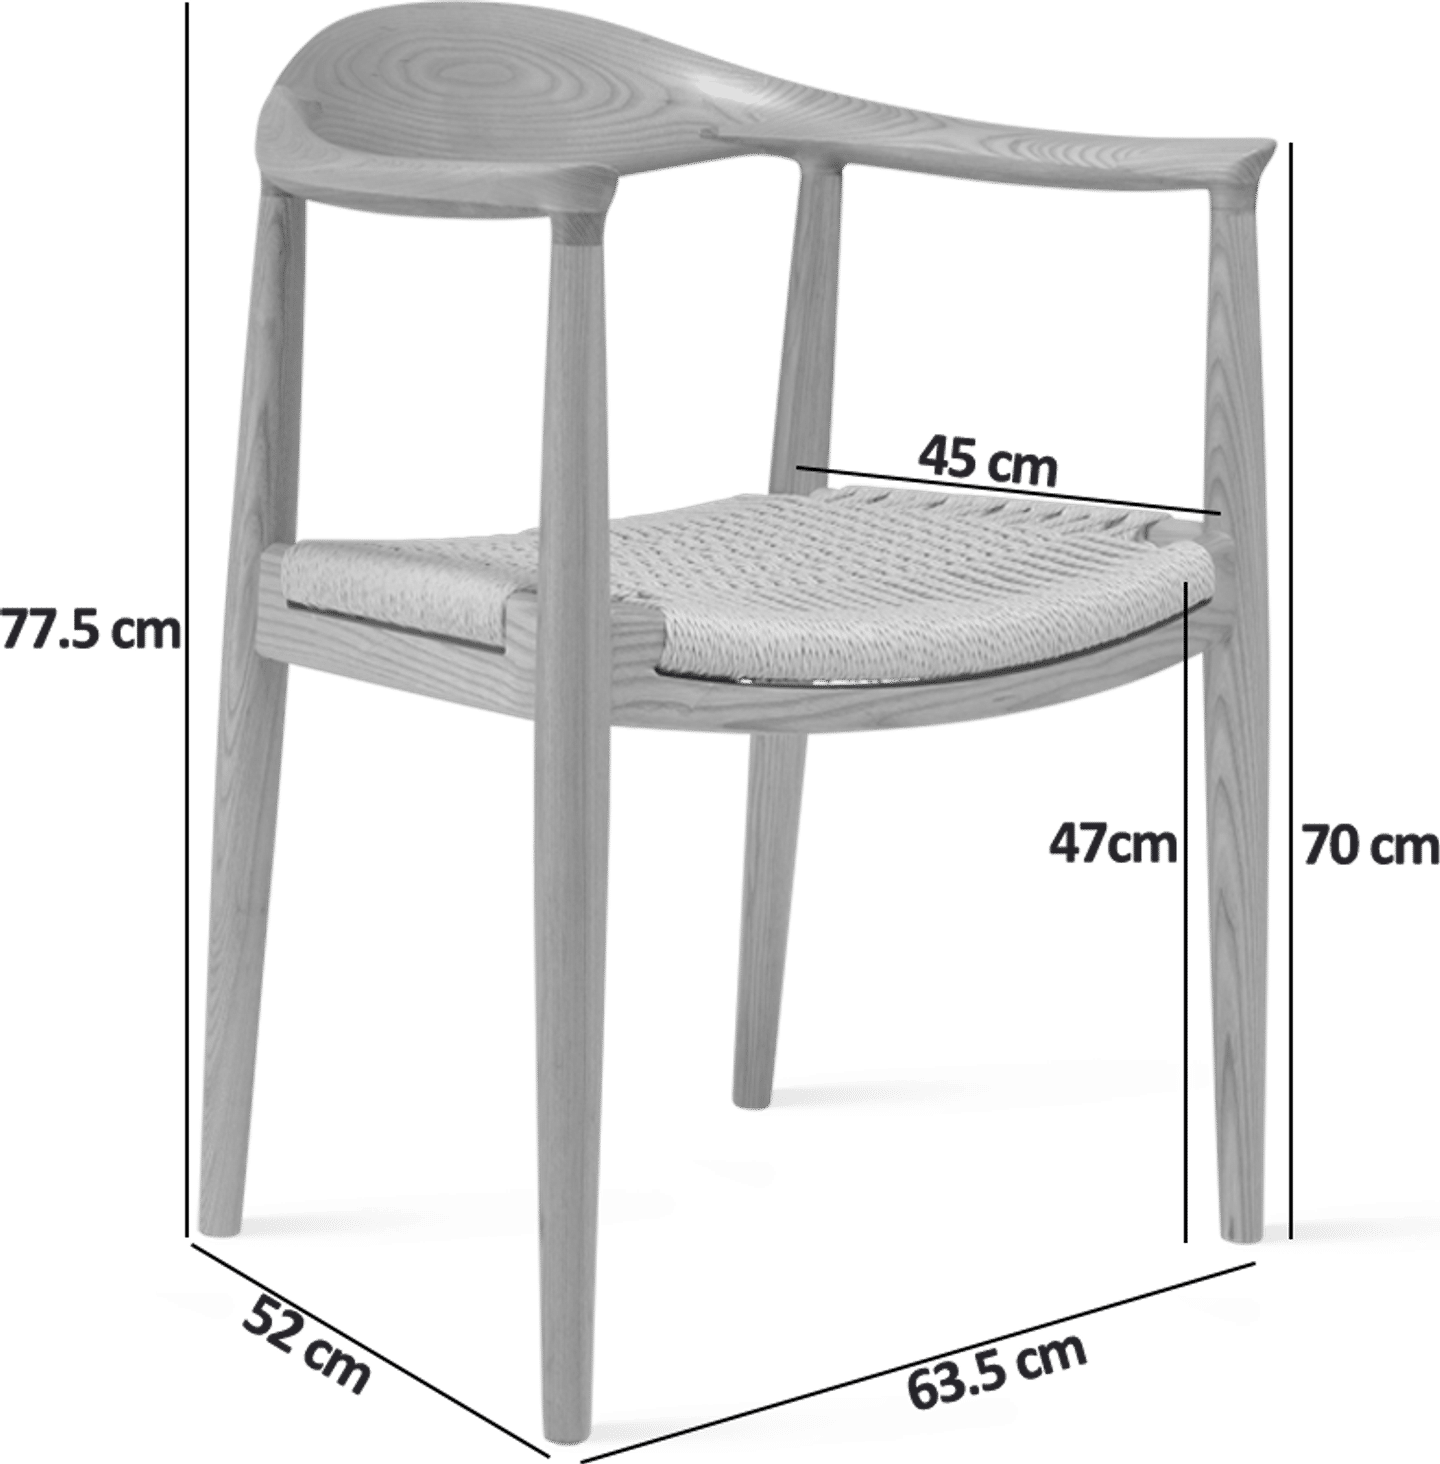 The Chair - PP501 - Reed Cord Seat Solid Ash  image.